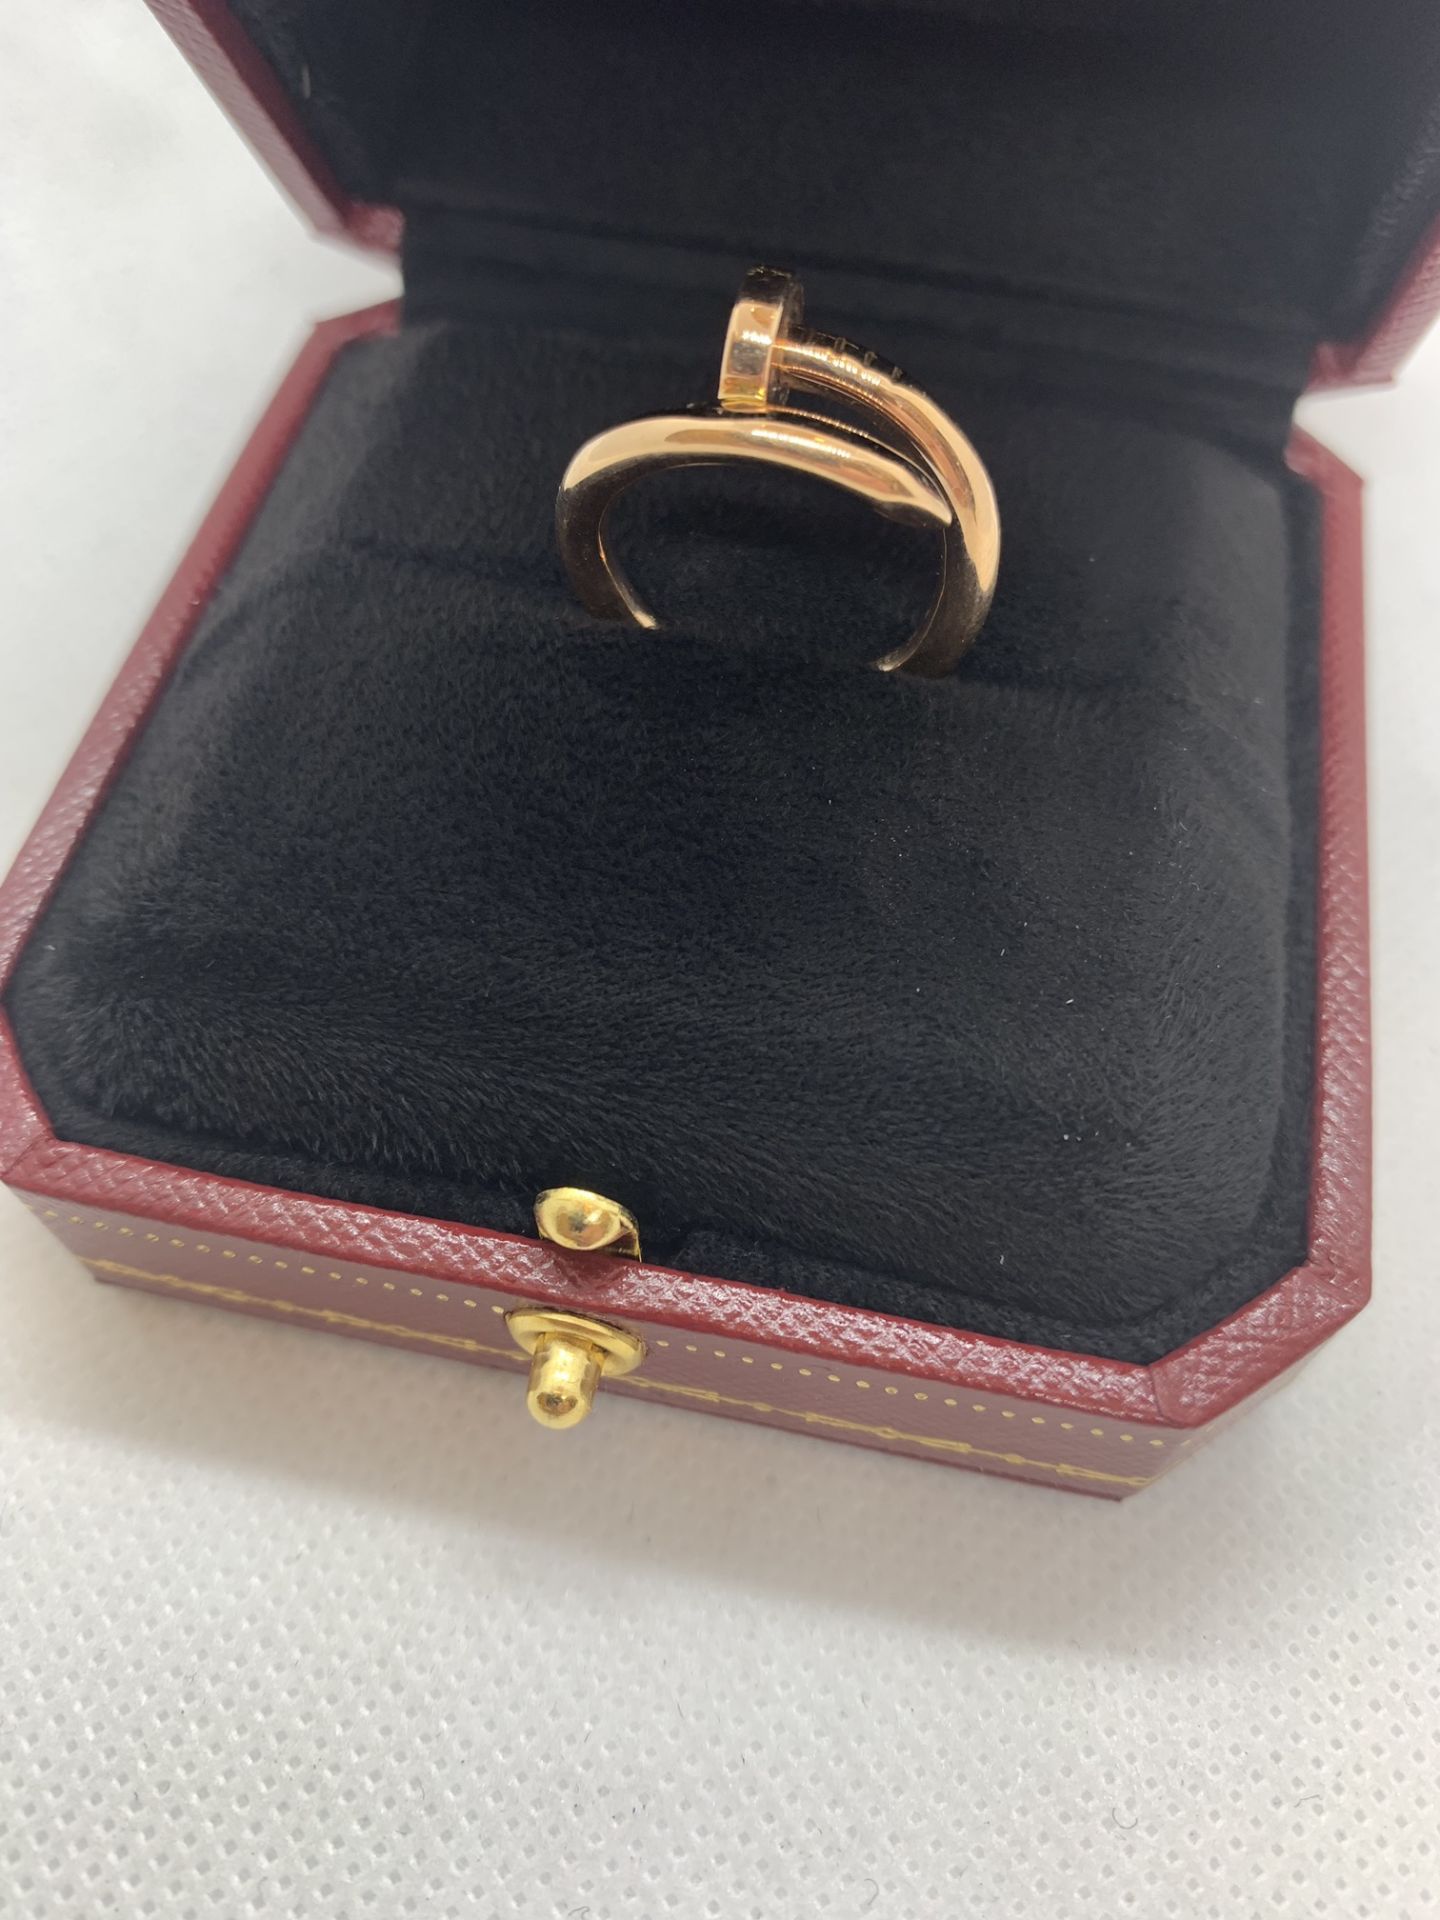 18ct ROSE GOLD JUSTE UN CLOU STYLE RING